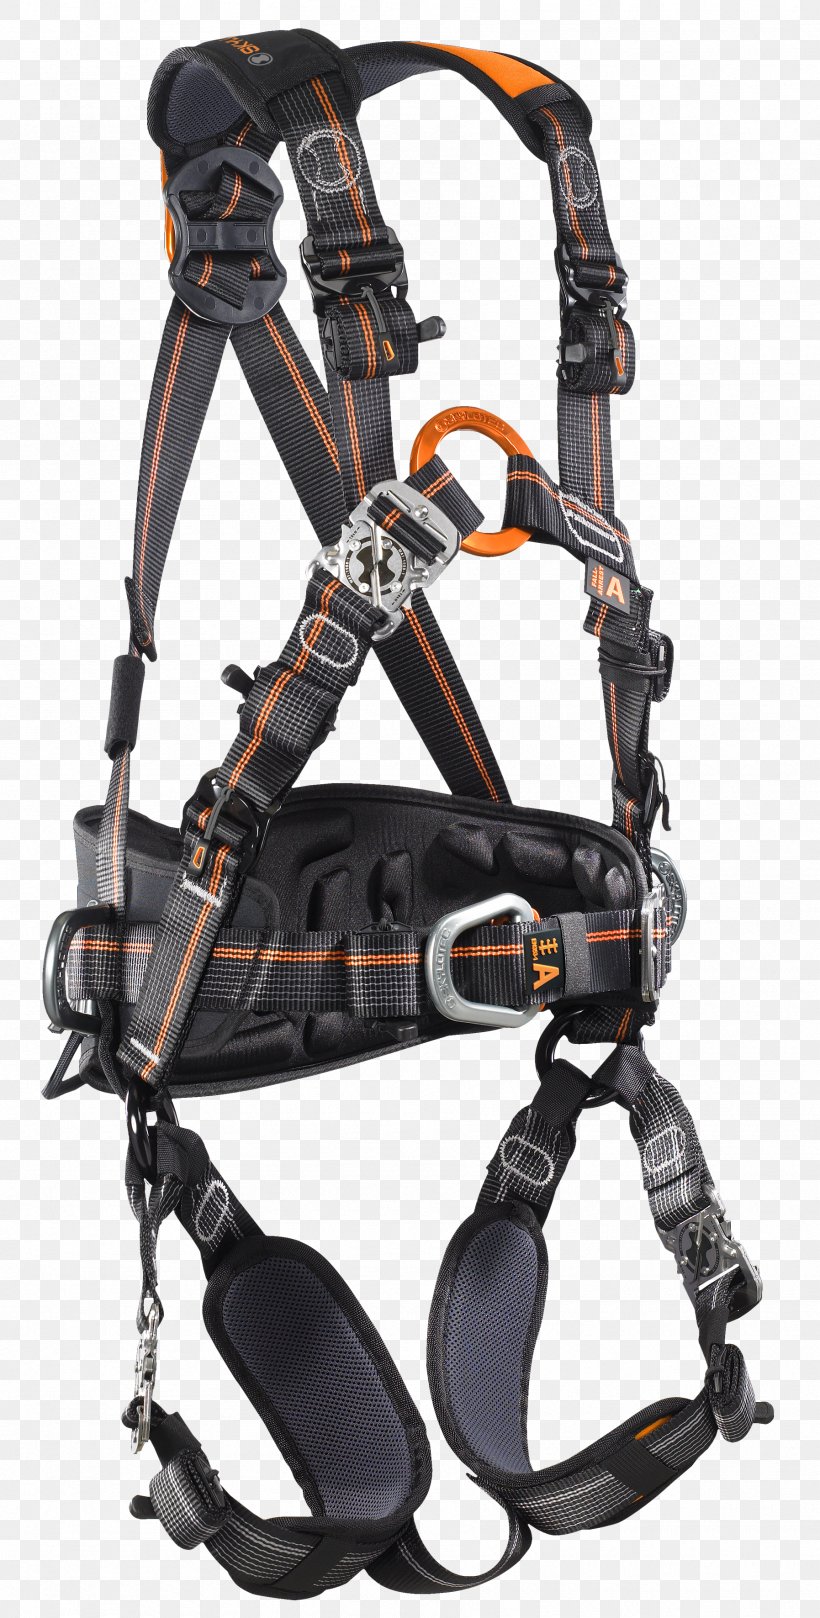 Climbing Harnesses SKYLOTEC Safety Harness Personal Protective Equipment, PNG, 1795x3543px, Climbing Harnesses, Climbing, Climbing Harness, Fall Arrest, Fall Protection Download Free